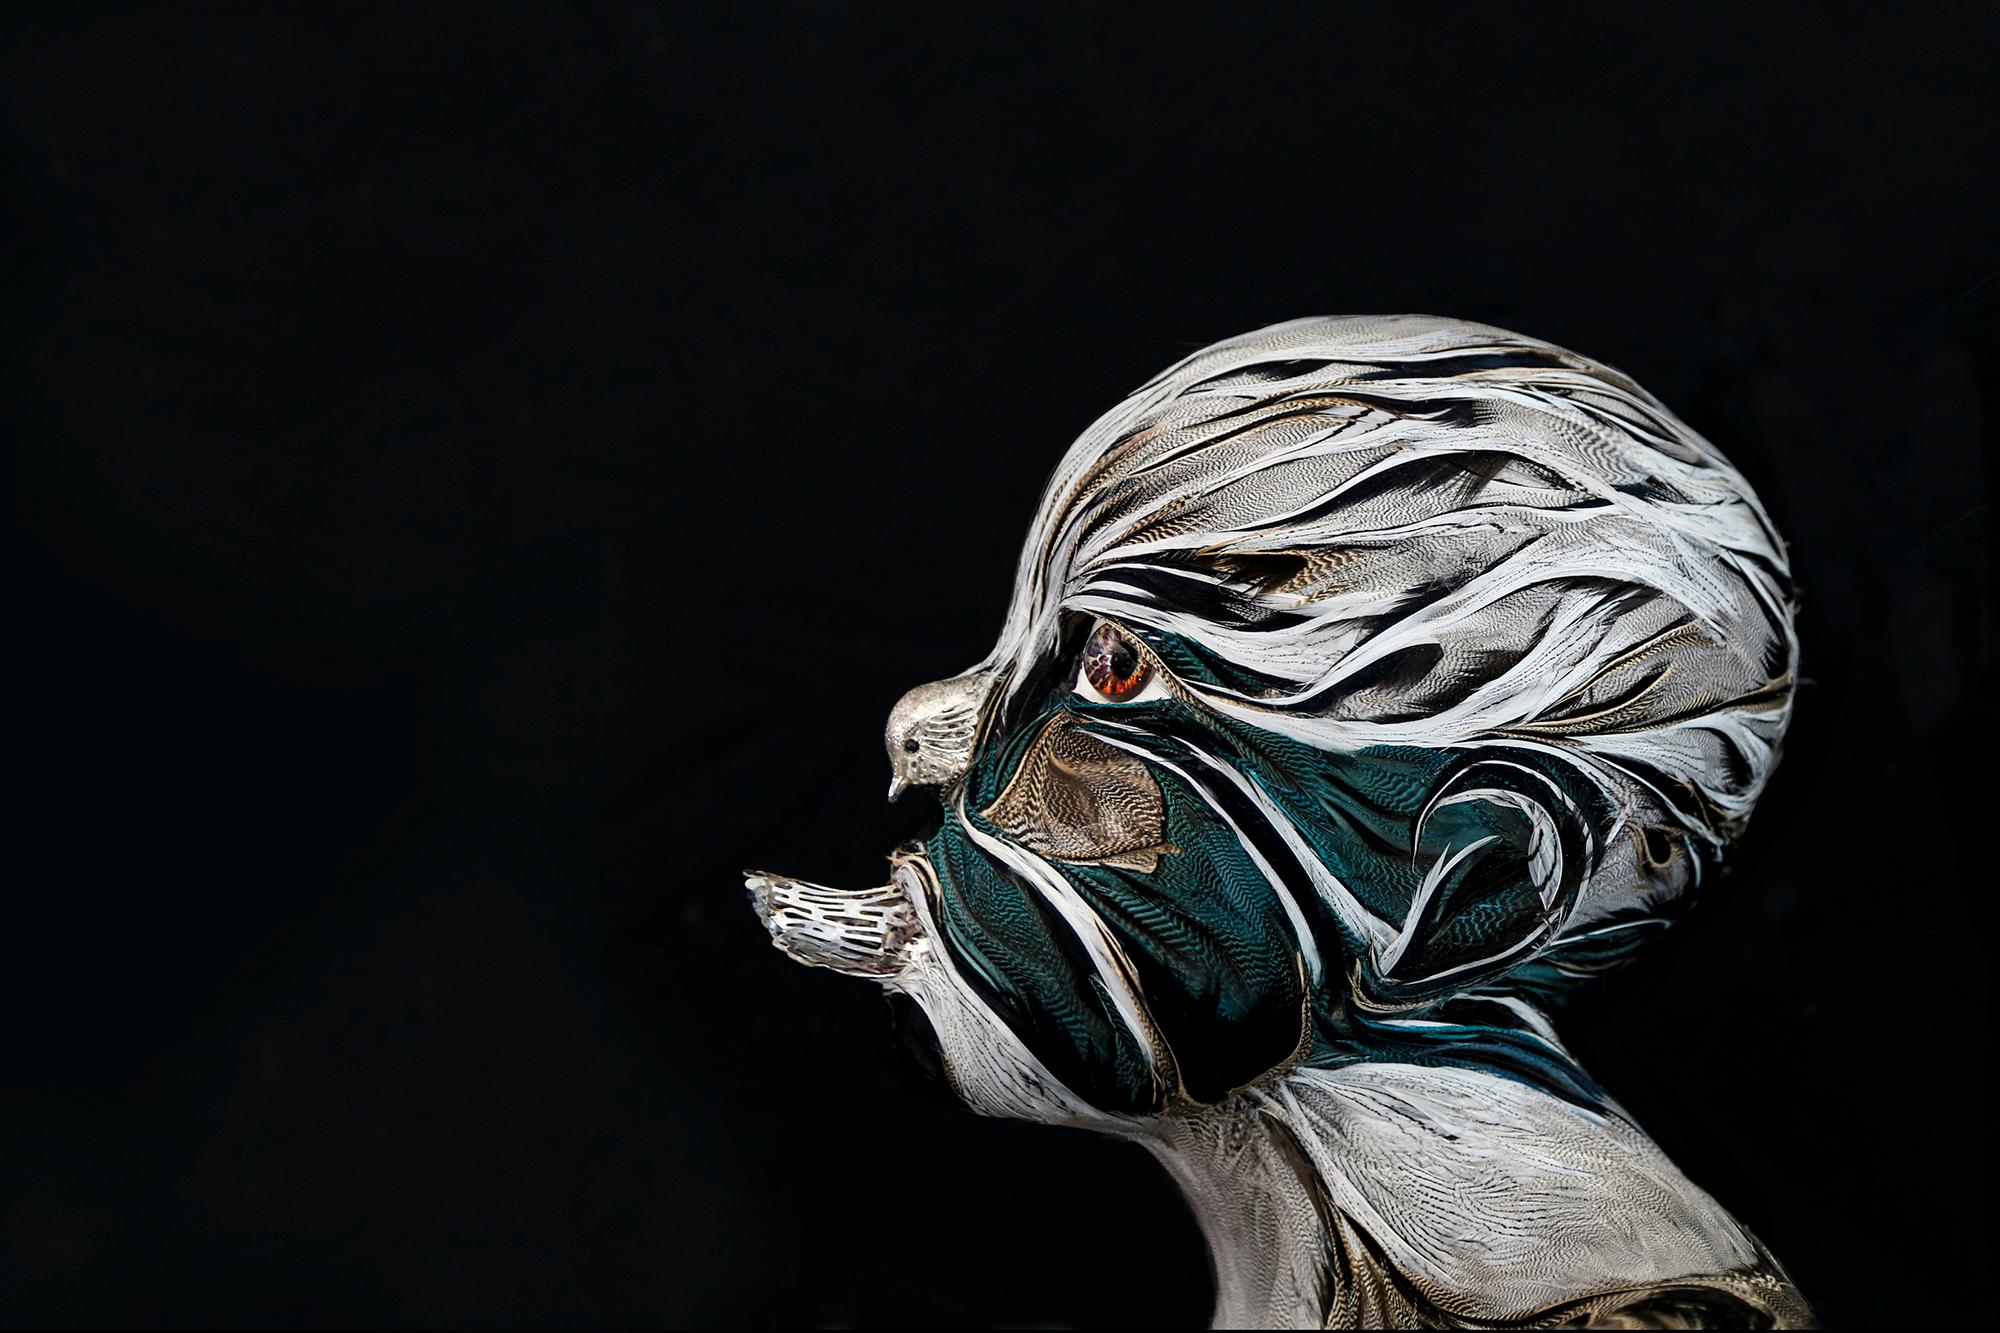 T H E M I S (the child)- 2019 Unique Piece.
H 126 x 47 x 62 cm.
Feathers of pheasant, duck and guinea fowl on poly- propylene. Ceramic feet. bird in silver metal. Eyes in glass and leather.

To create Themis, Laurence Le Constant was inspired by a